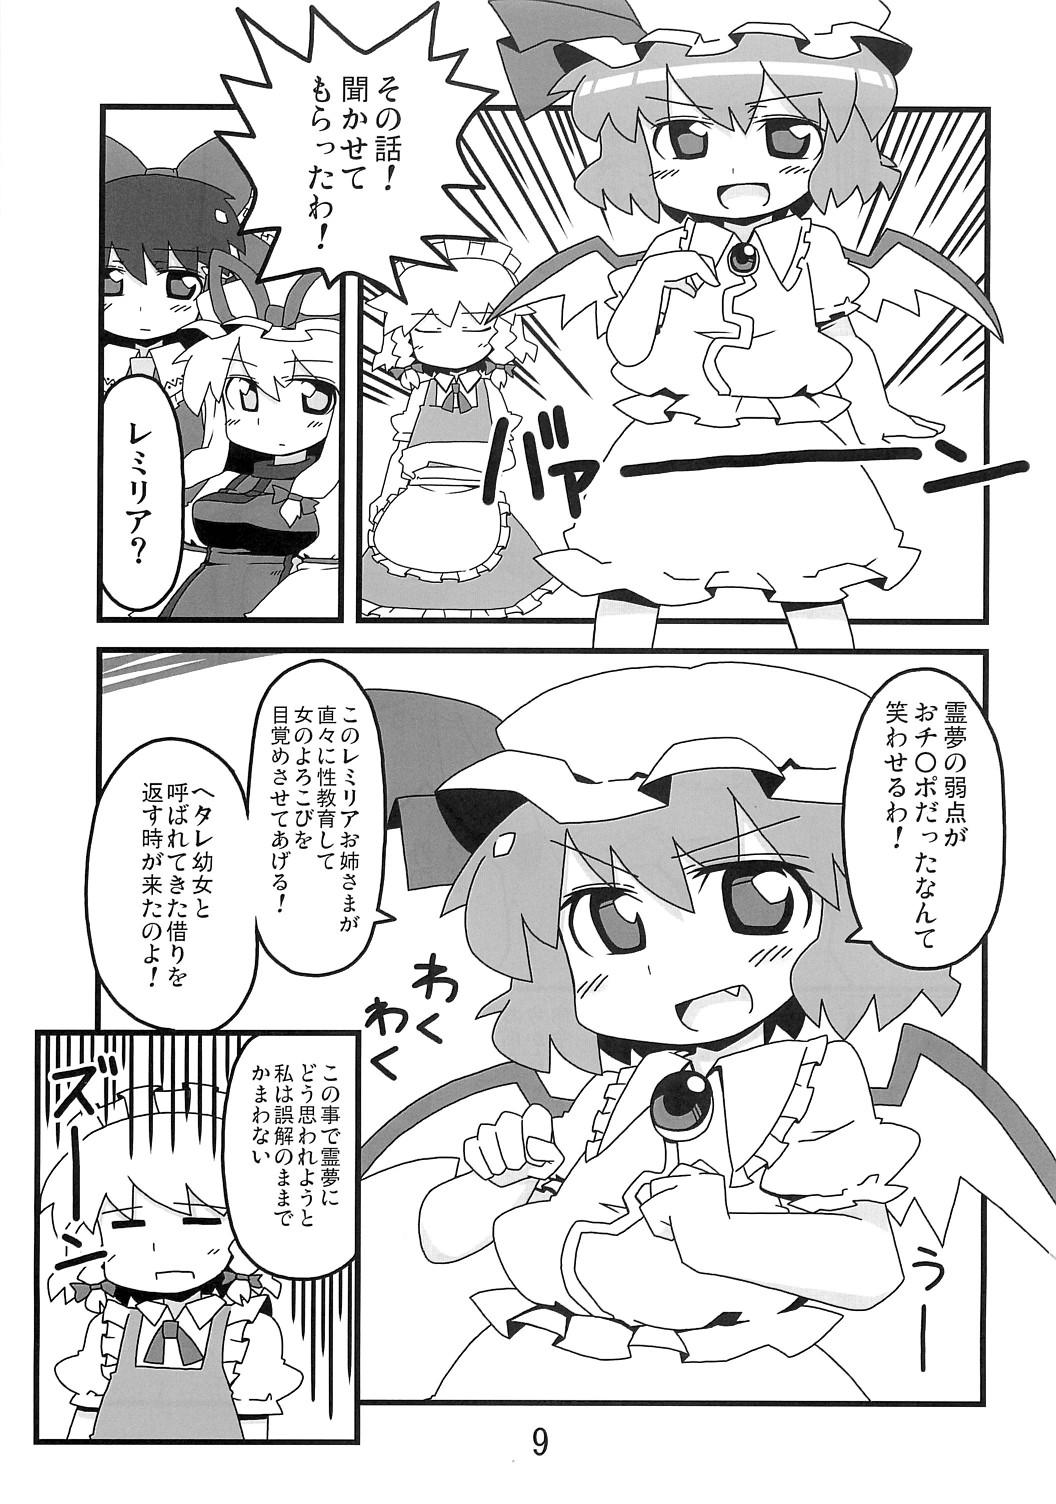 Dominicana 東方豊年祭 - Touhou project Femdom - Page 8